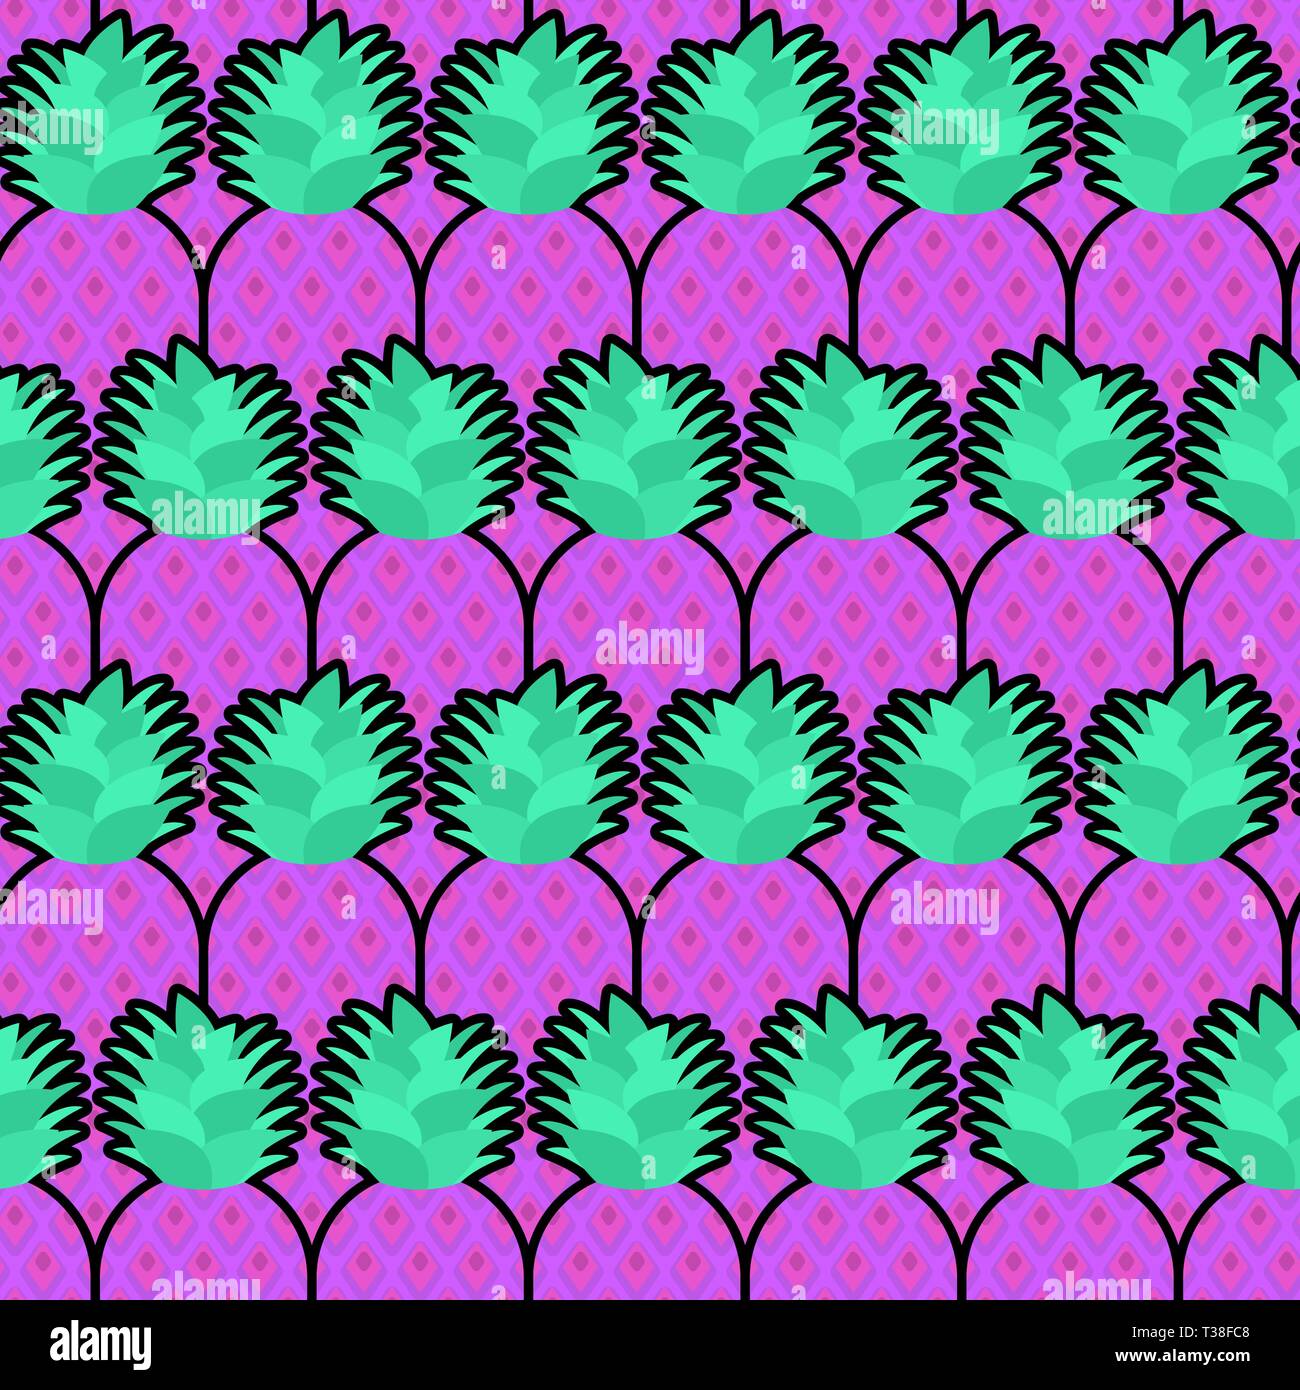 Purple Pineapple pattern seamless. pineapples background. Fruits texture. Cartoon style vector ornament Stock Vector